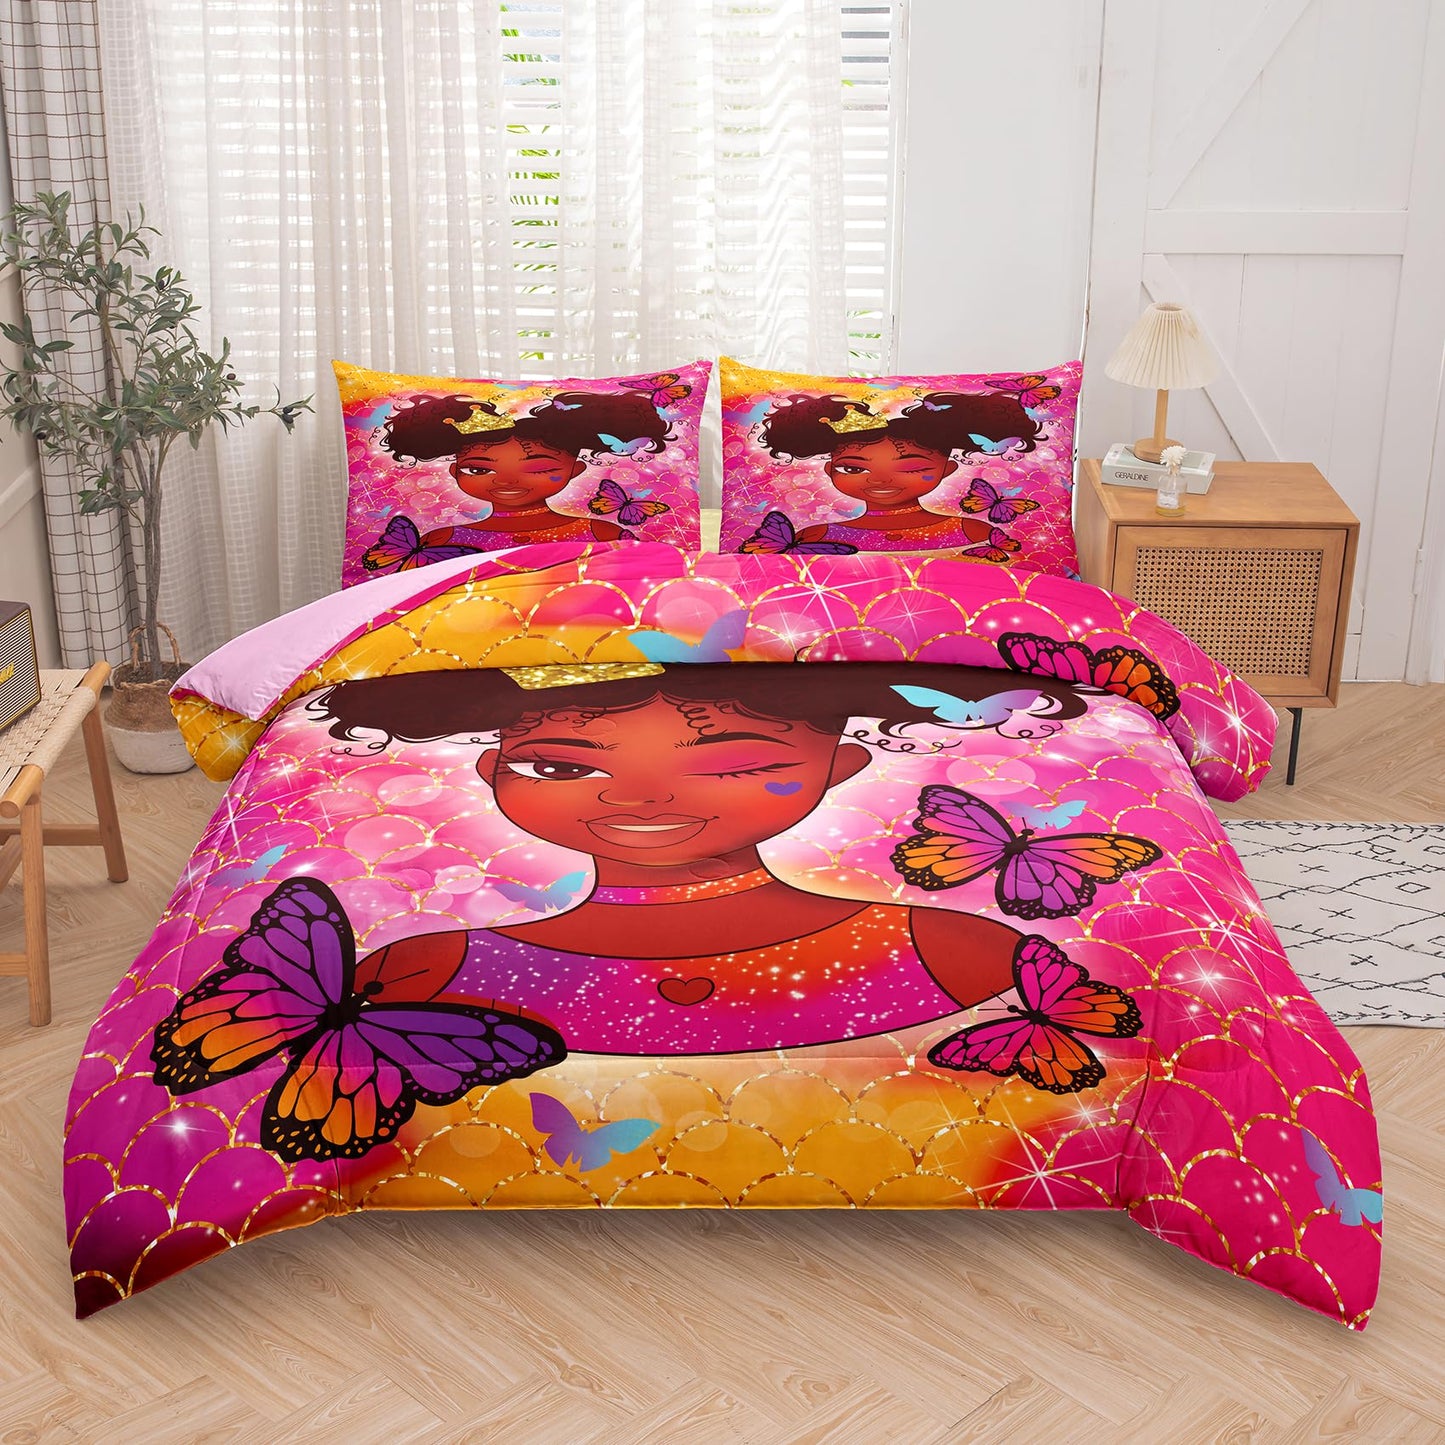 Tailor Shop Kawaii African American Black Girl Comforter Set Pink and Red Bedding Sets for Girls Kids Cute Magic Black Girl Bedding Set Mermaid Butterfly Comforter Full Size with 2 Pillowcase…